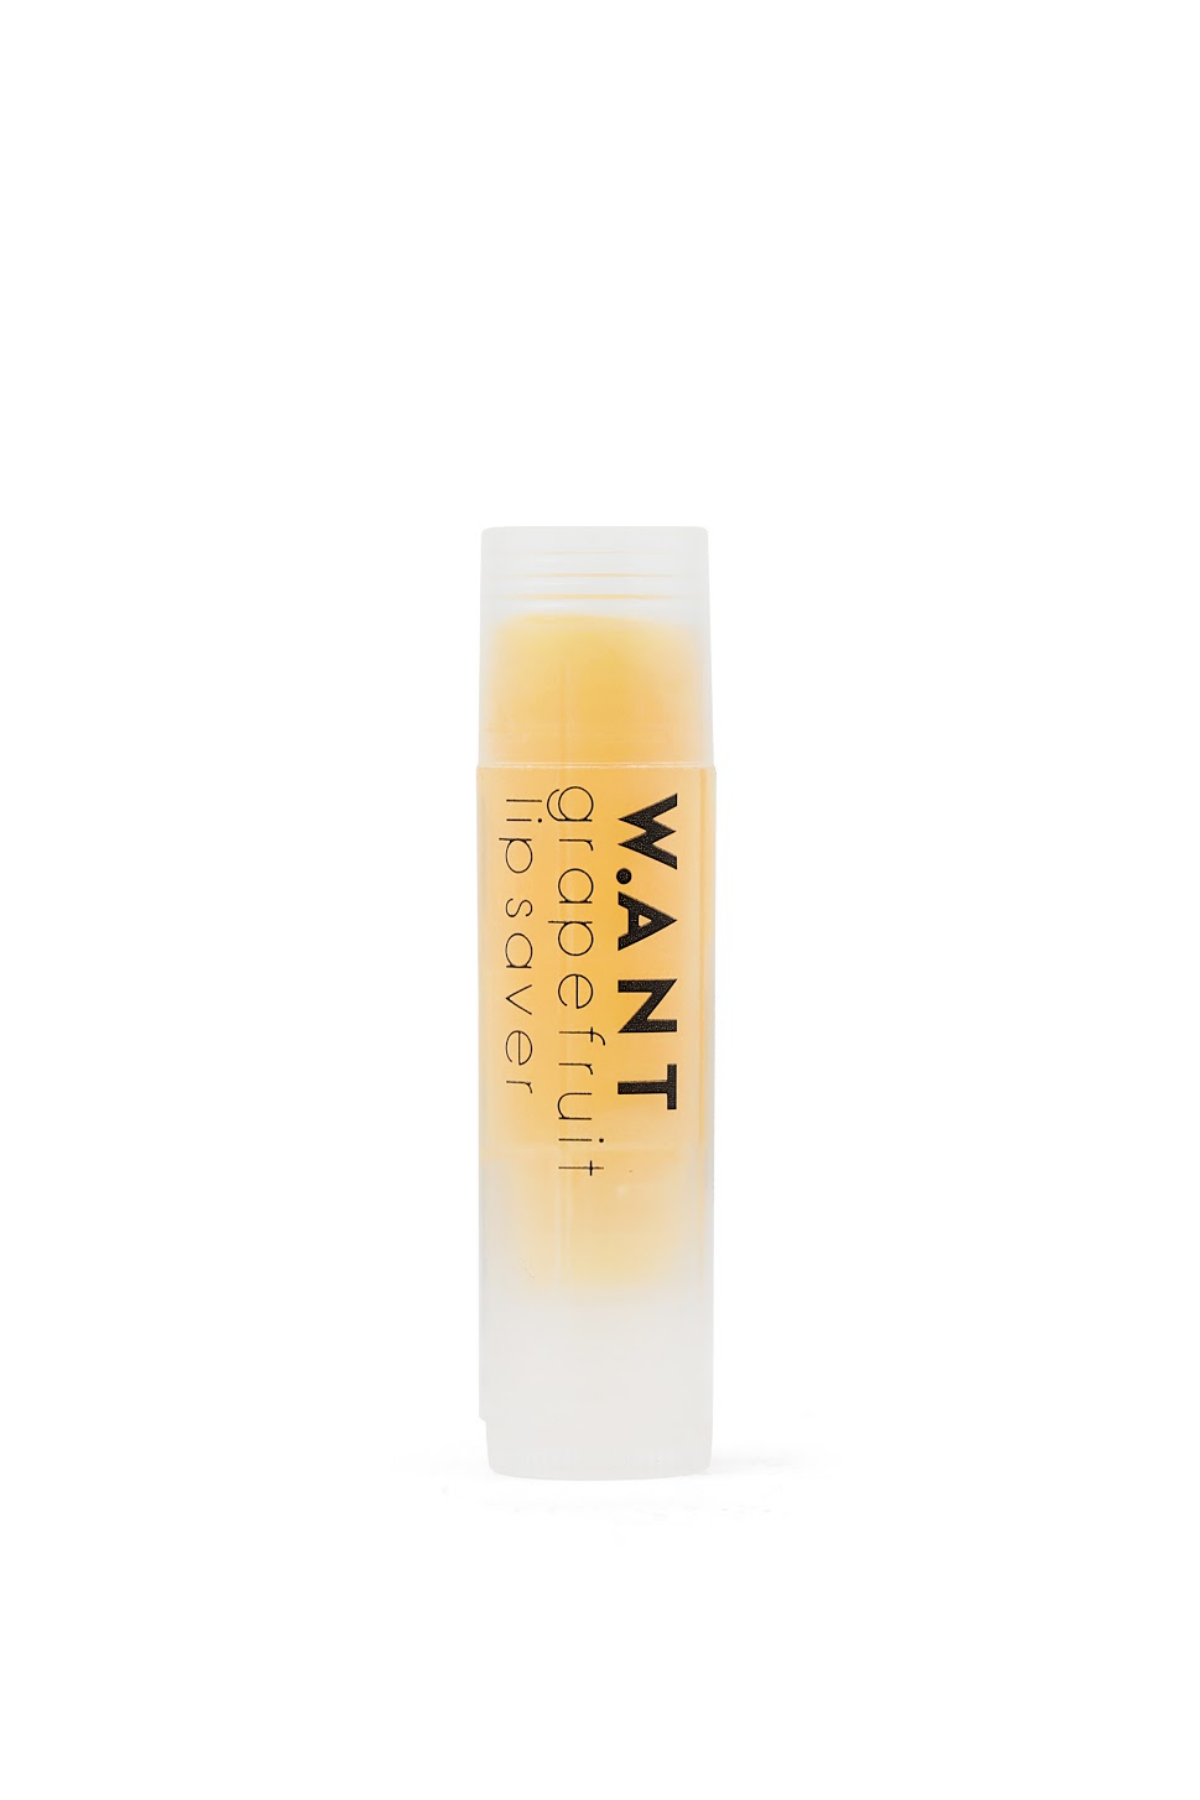 Grapefruit lip saver by Want Skincare, available on ZERRIN